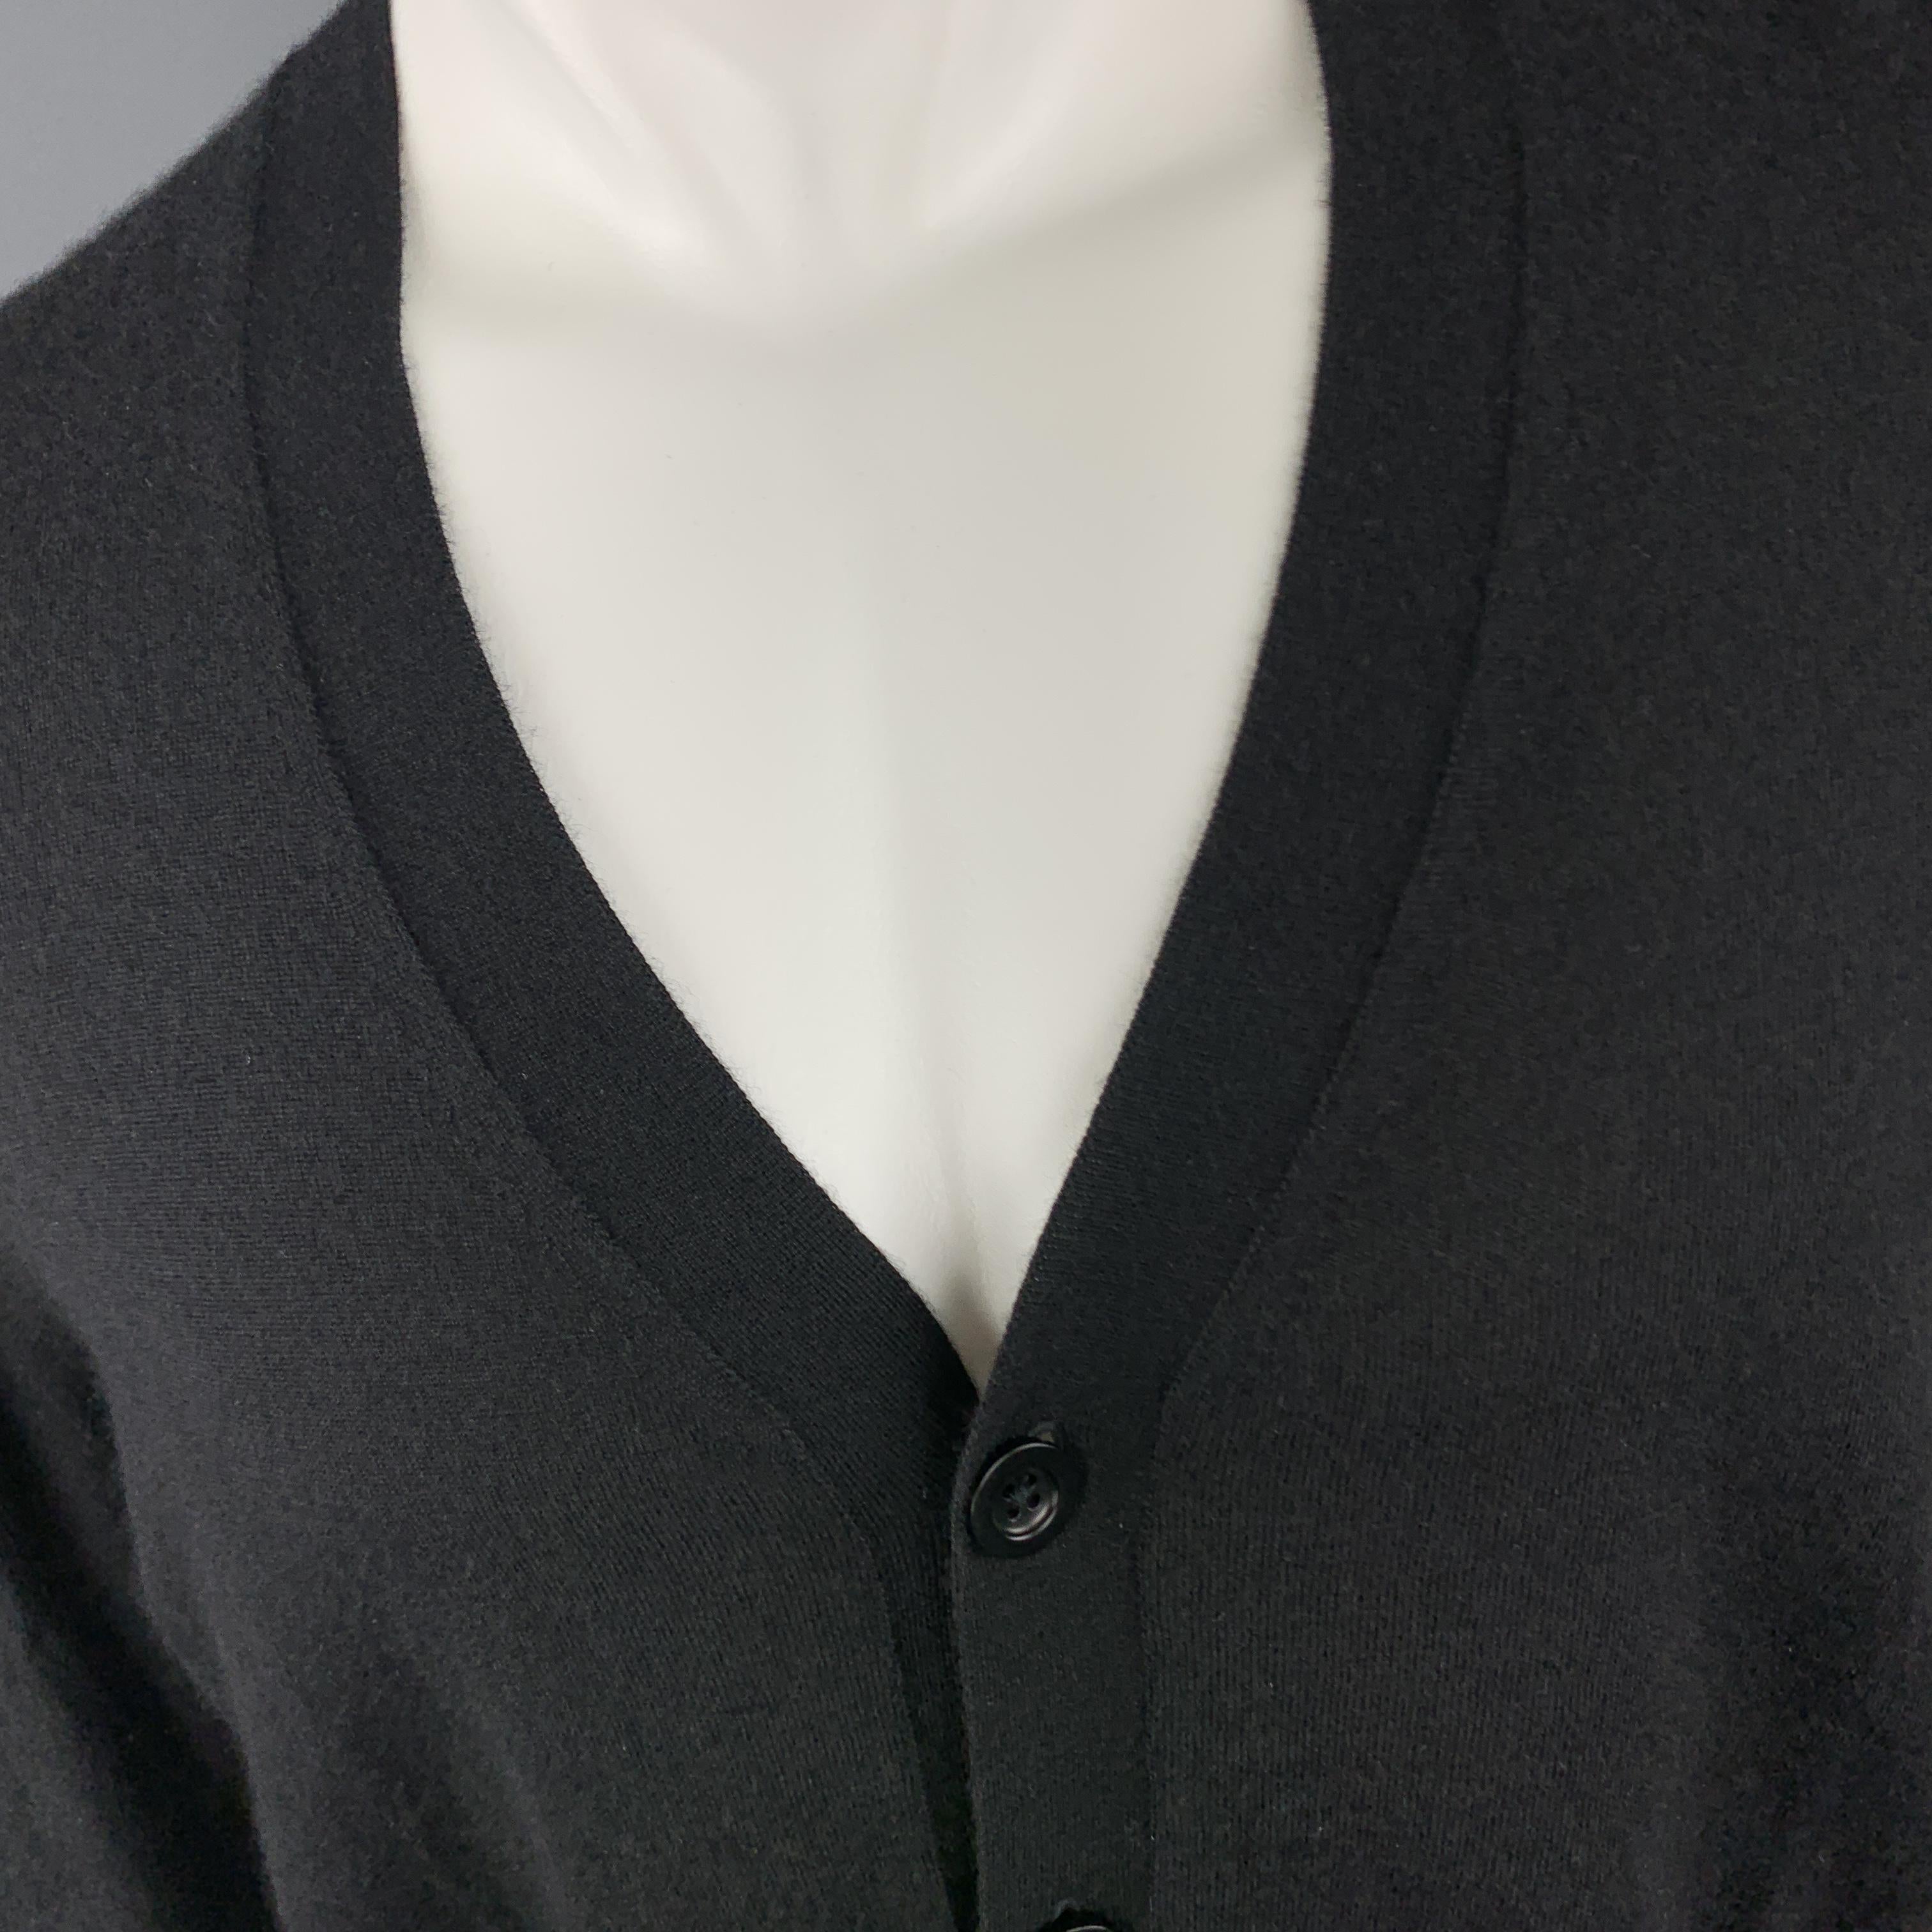 MAISON MARTIN MARGIELA cardigan comes in sheer cashmere knit with a v neck and white stitch back. Made in Italy.

Excellent Pre-Owned Condition.
Marked: 1

Measurements:

Shoulder: 18 in.
Chest: 41 in.
Sleeve: 27 in.
Length: 27 in.